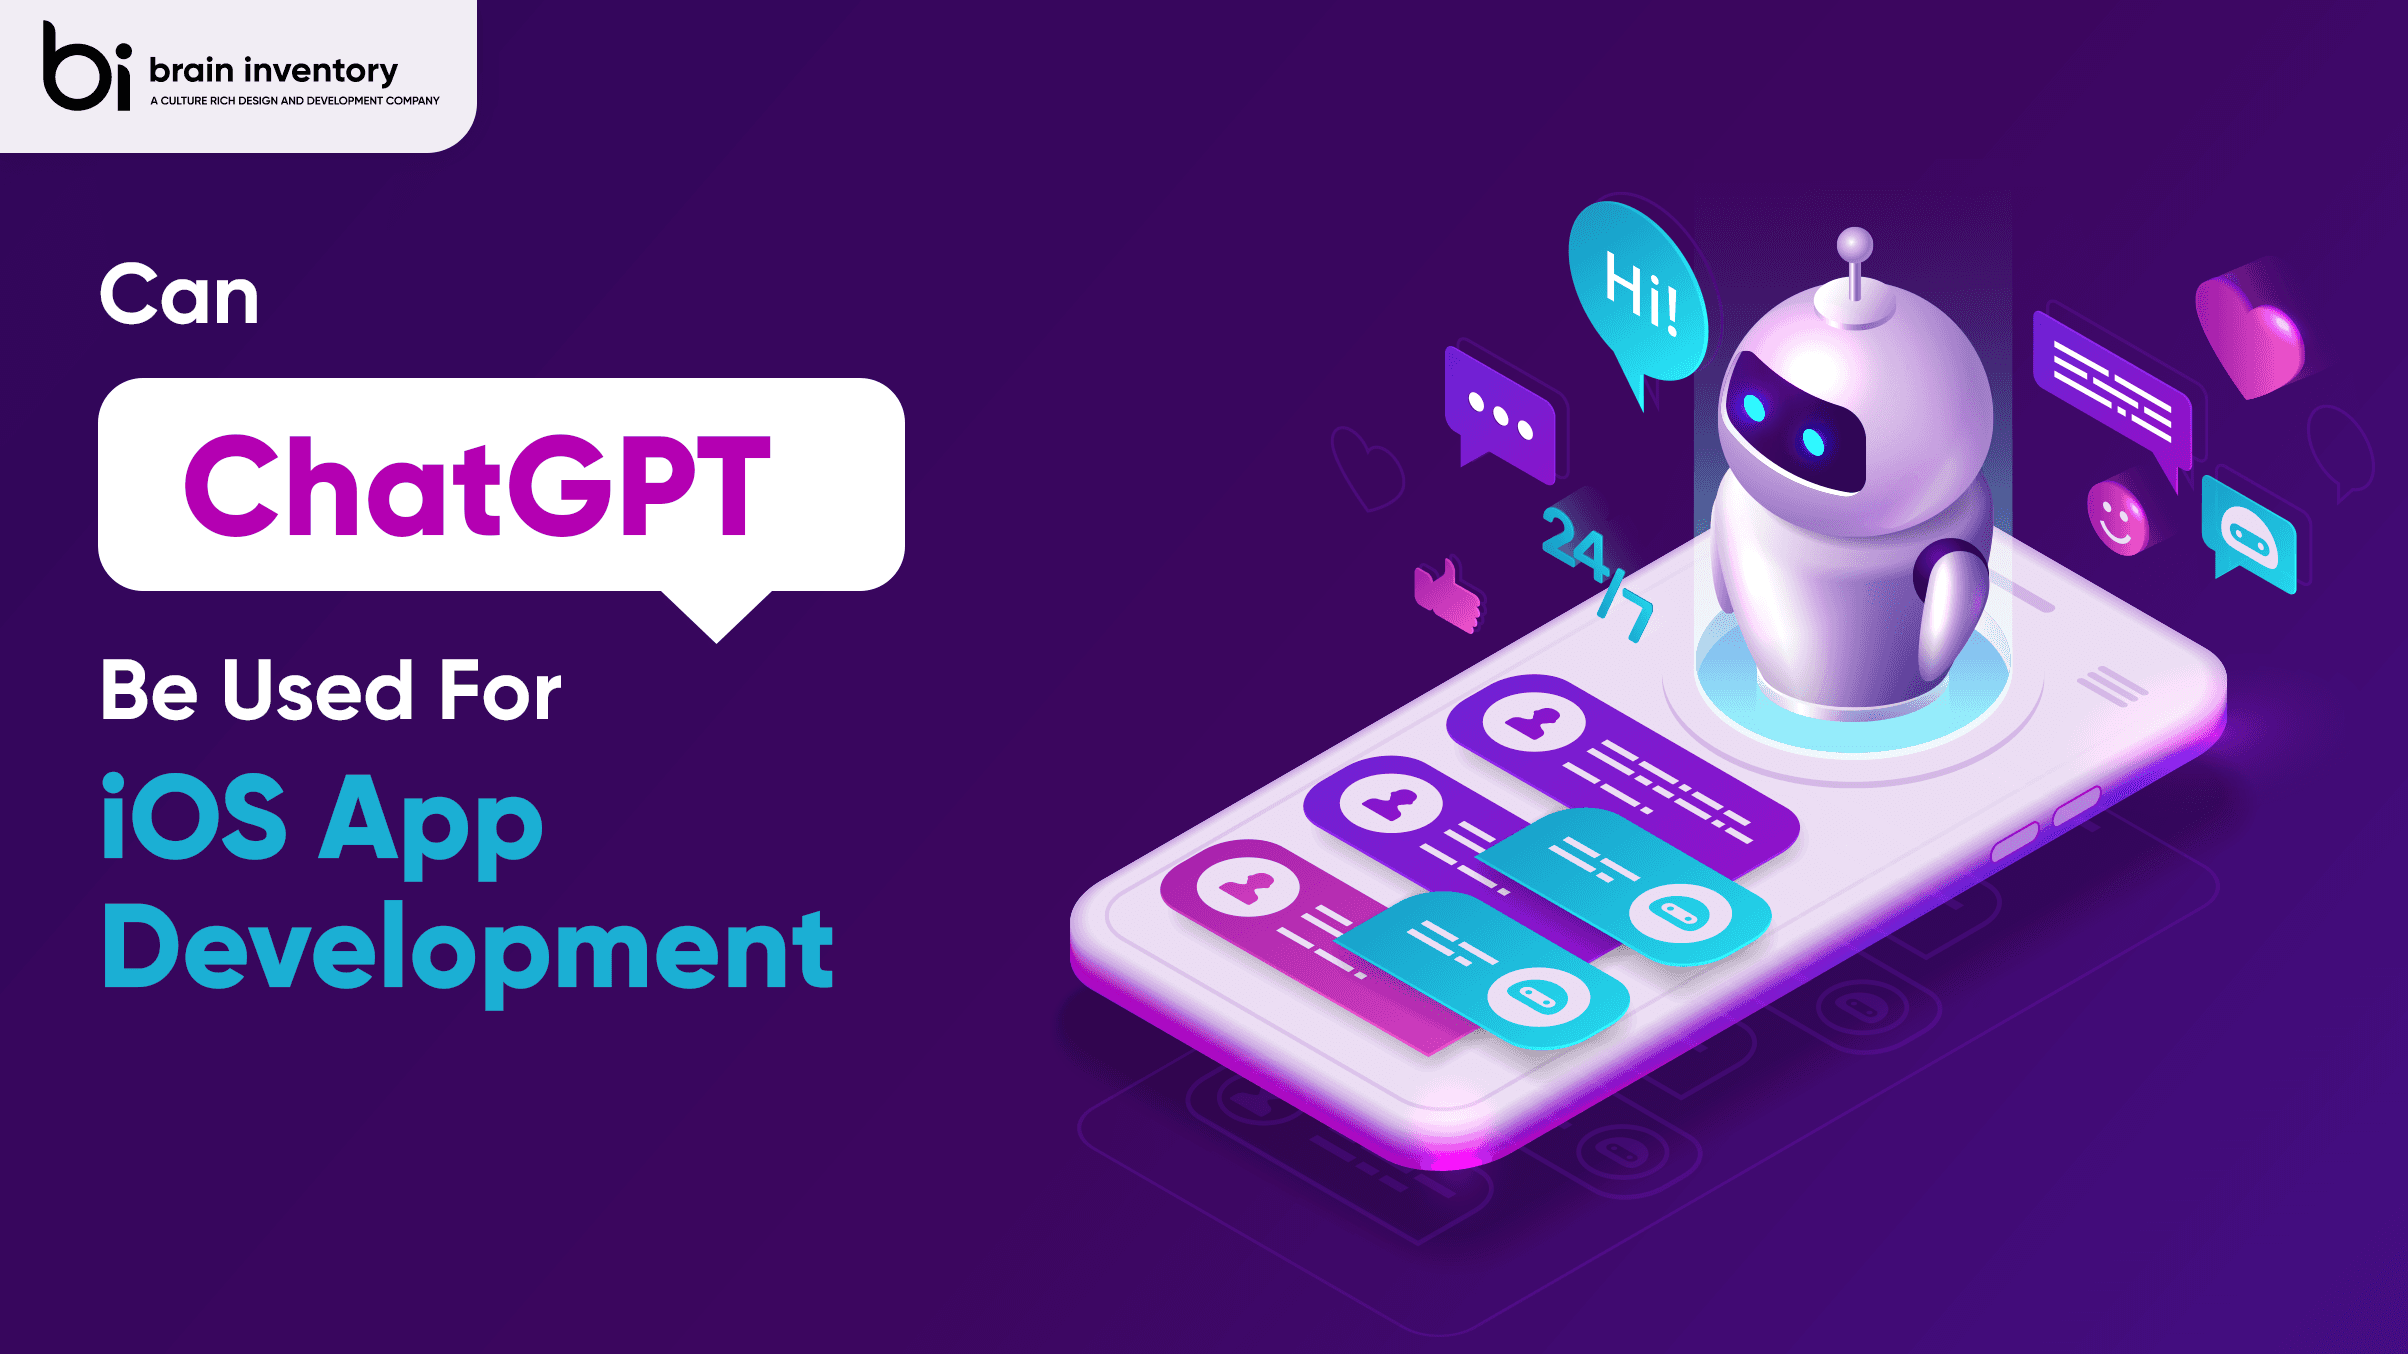 Can ChatGPT Be Used For iOS App Development?